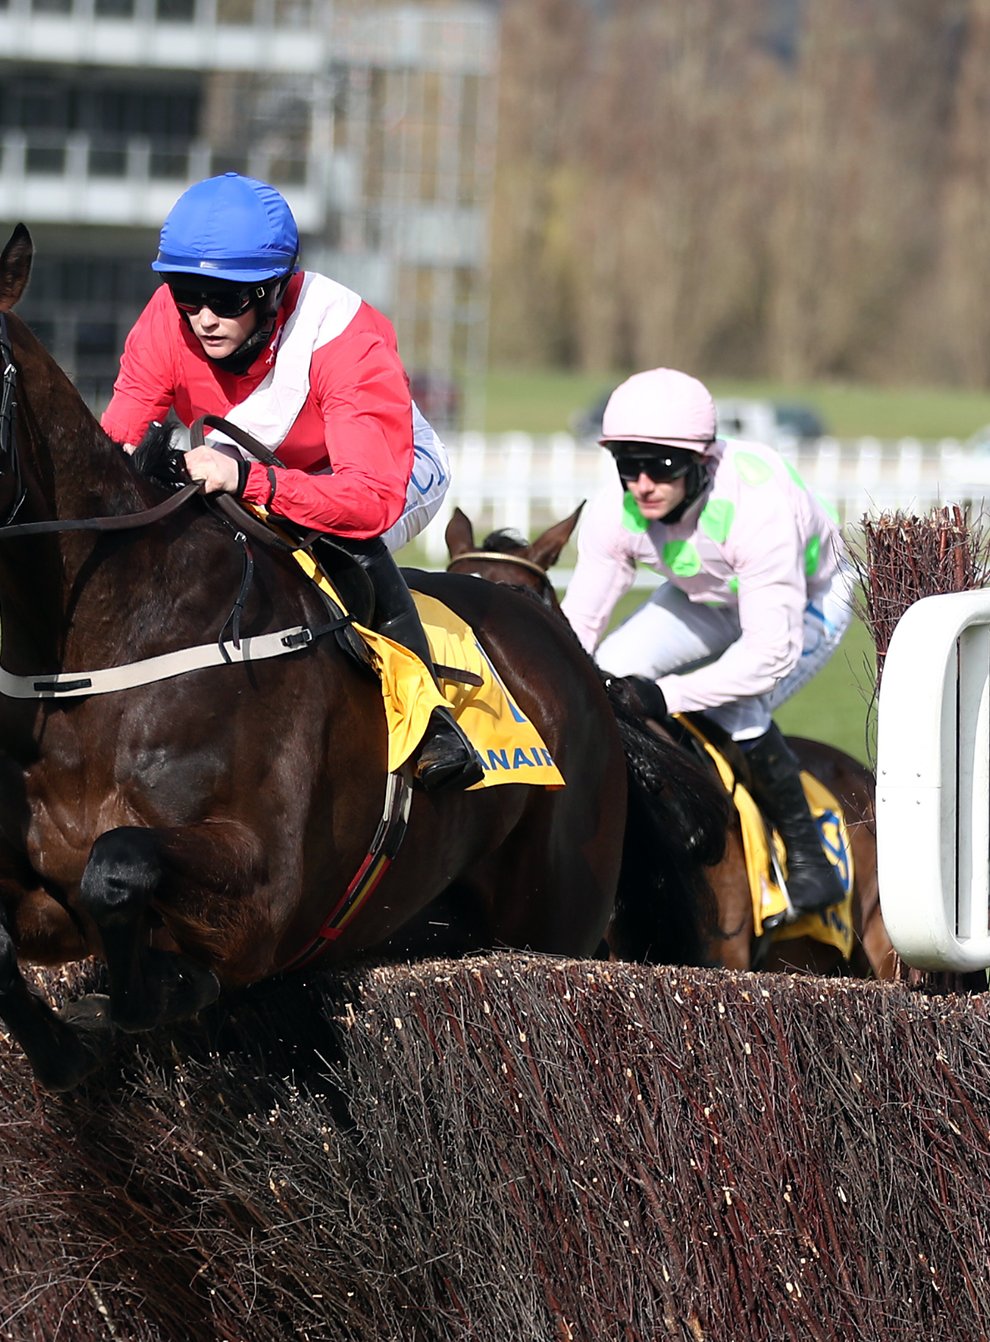 Allaho will be one of the stars on show on the opening day of the Punchestown Festival